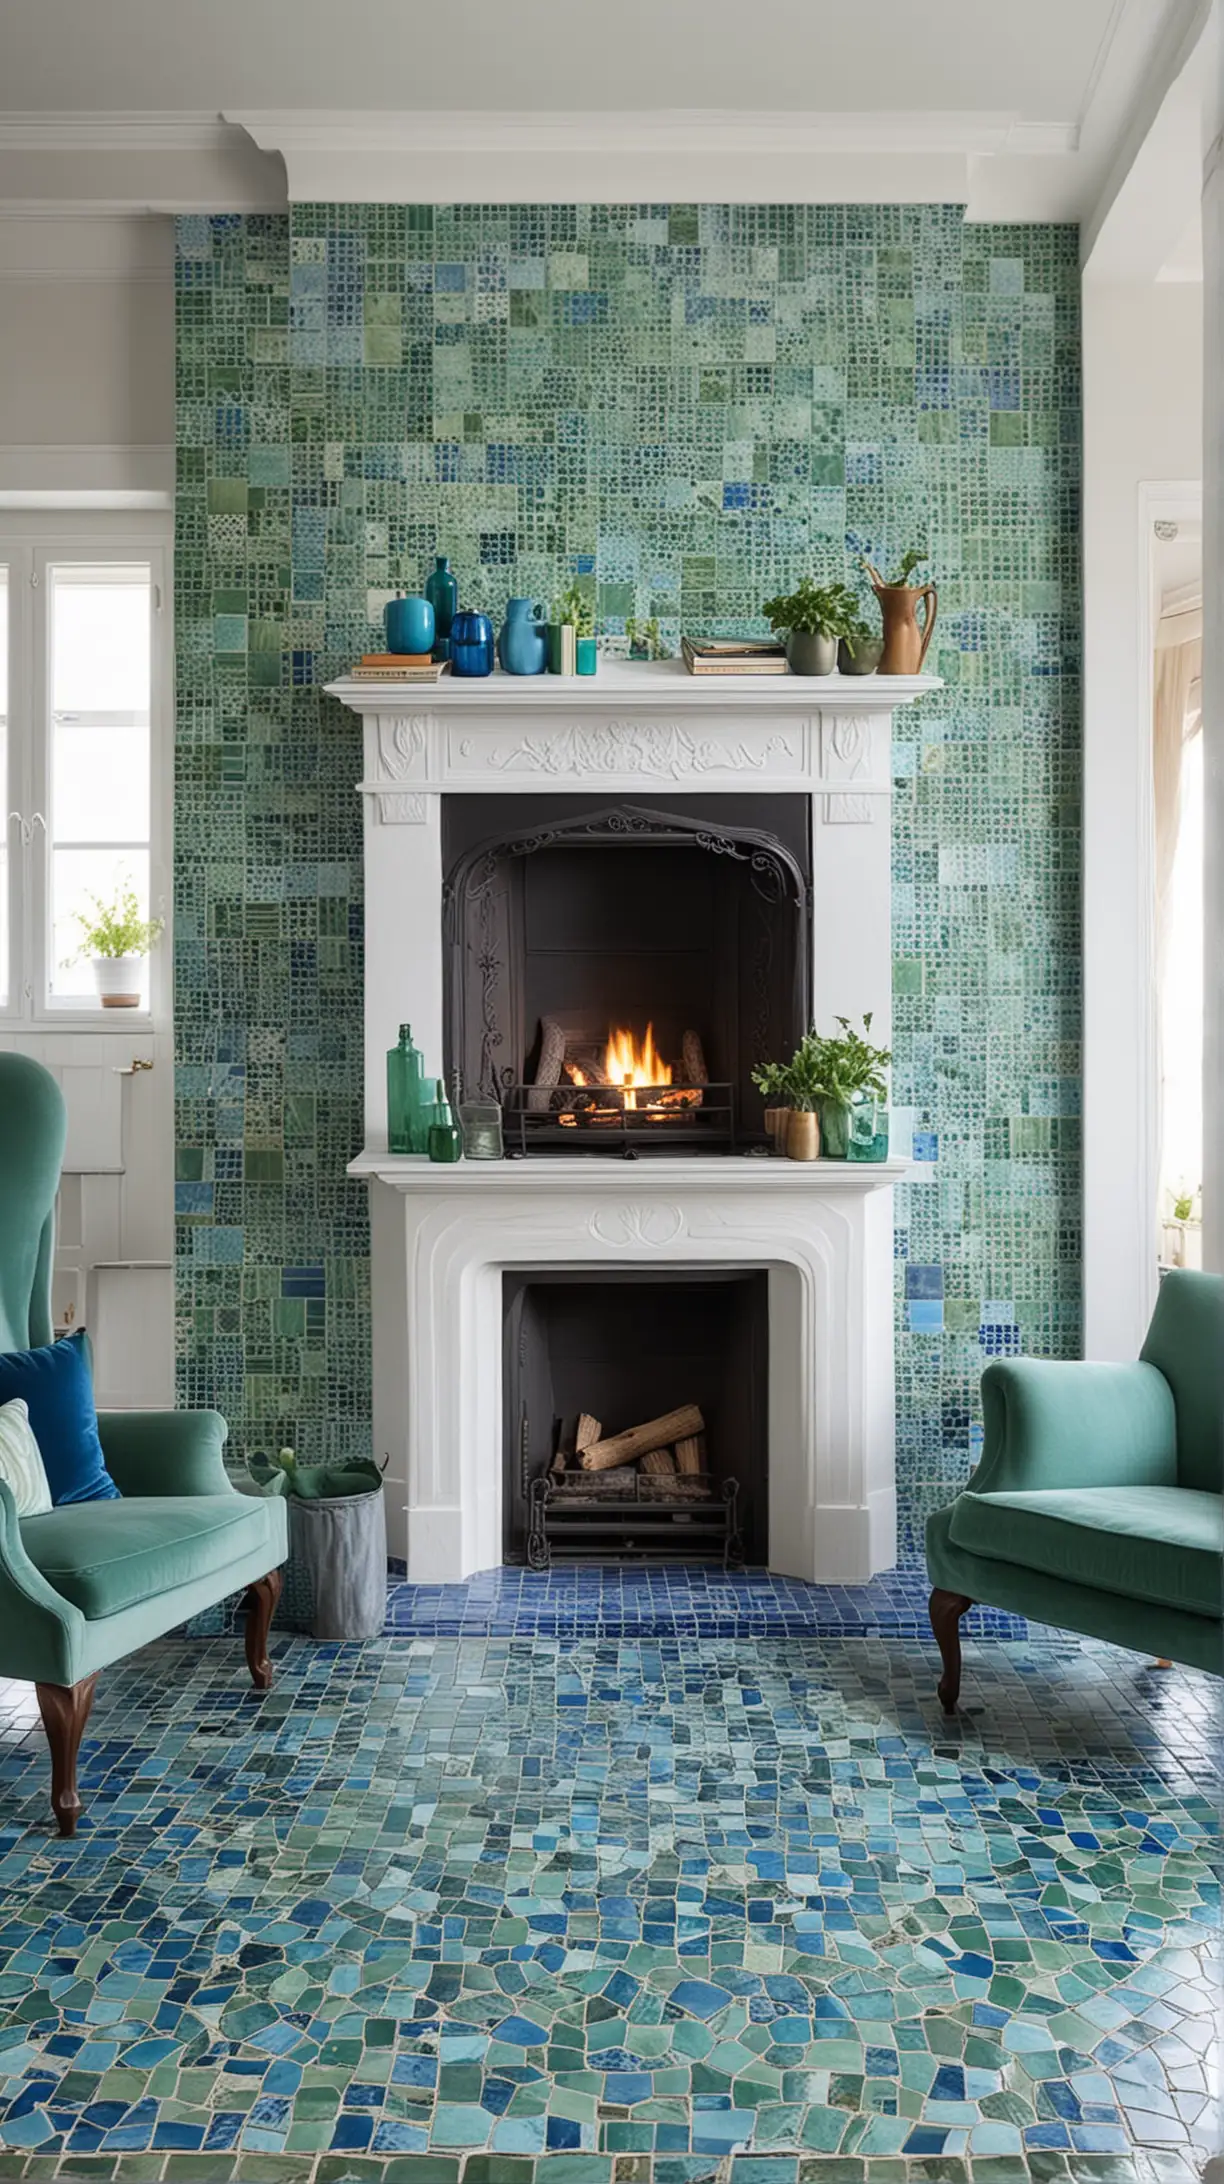 create a blue and green living room idea image [Blue and Green Tiles
If you have a fireplace, consider revamping it with blue and green tiles. This not only becomes a focal point but also introduces a unique element of artistry and color into your living room. with sitting chairs]